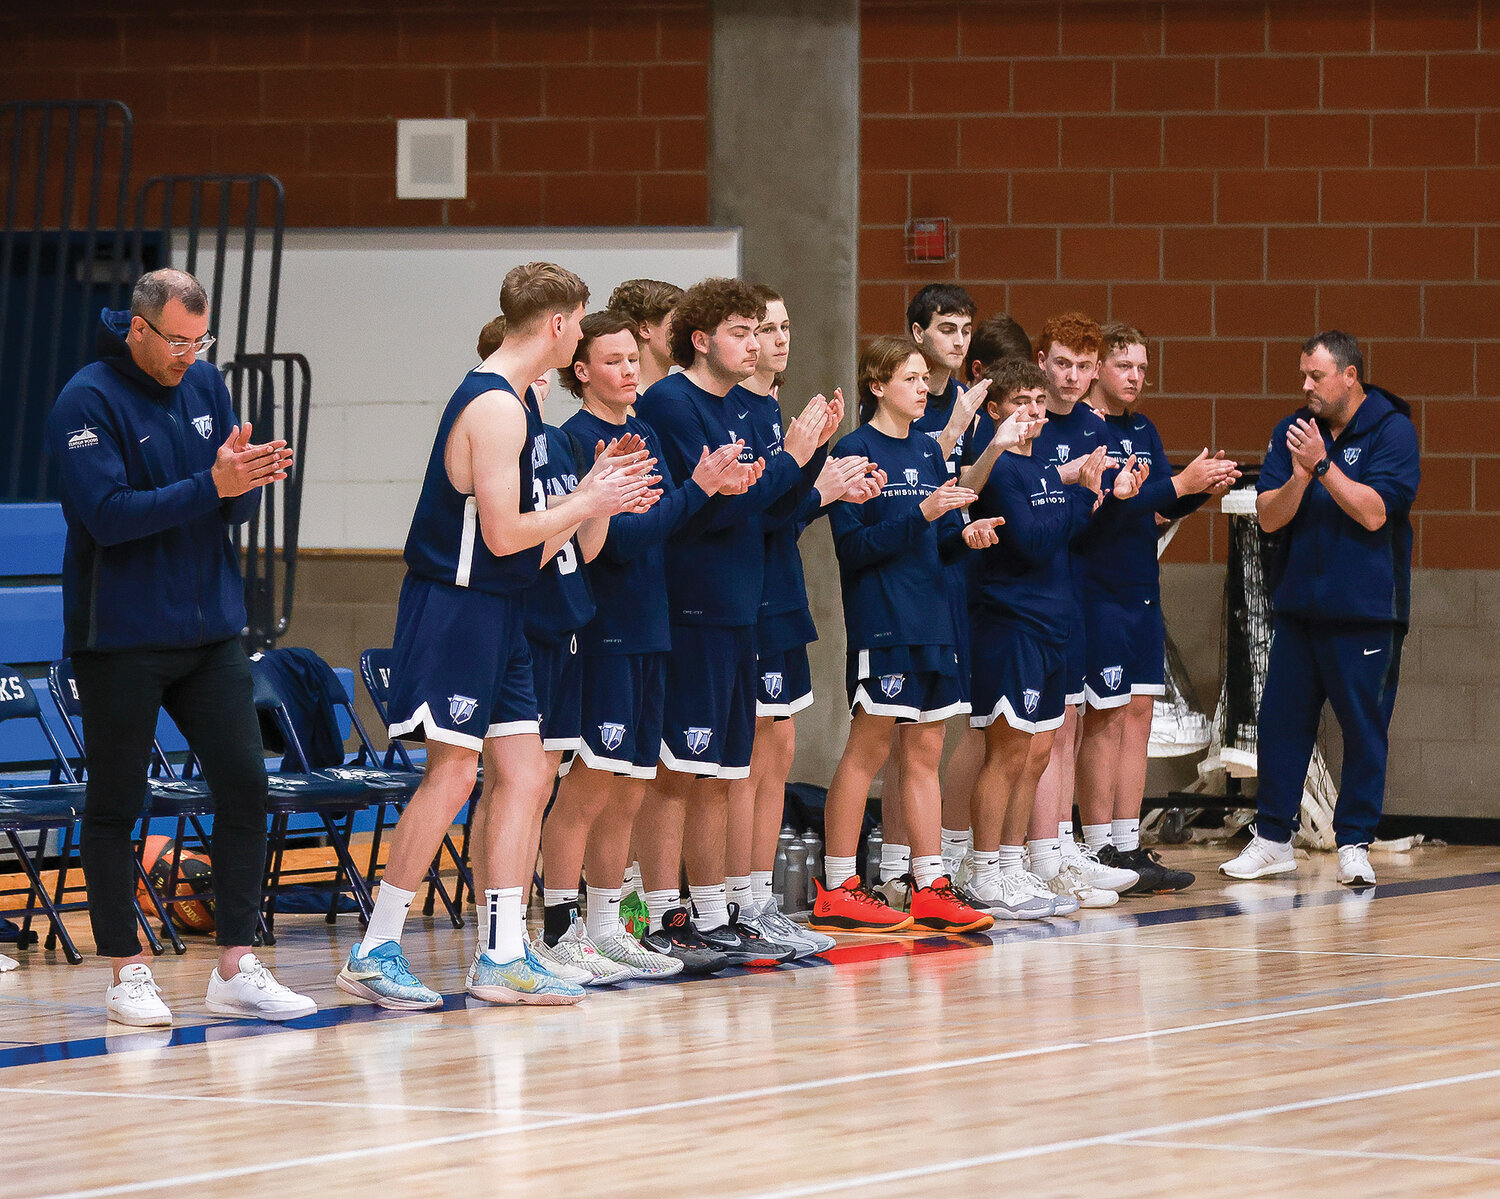 The Tenison Woods College boys basketball team from Mount Gambier, Australia, claps after the Hockinson High School band plays the Australian and American national anthems during their exhibition basketball game on Thursday, Nov. 30.